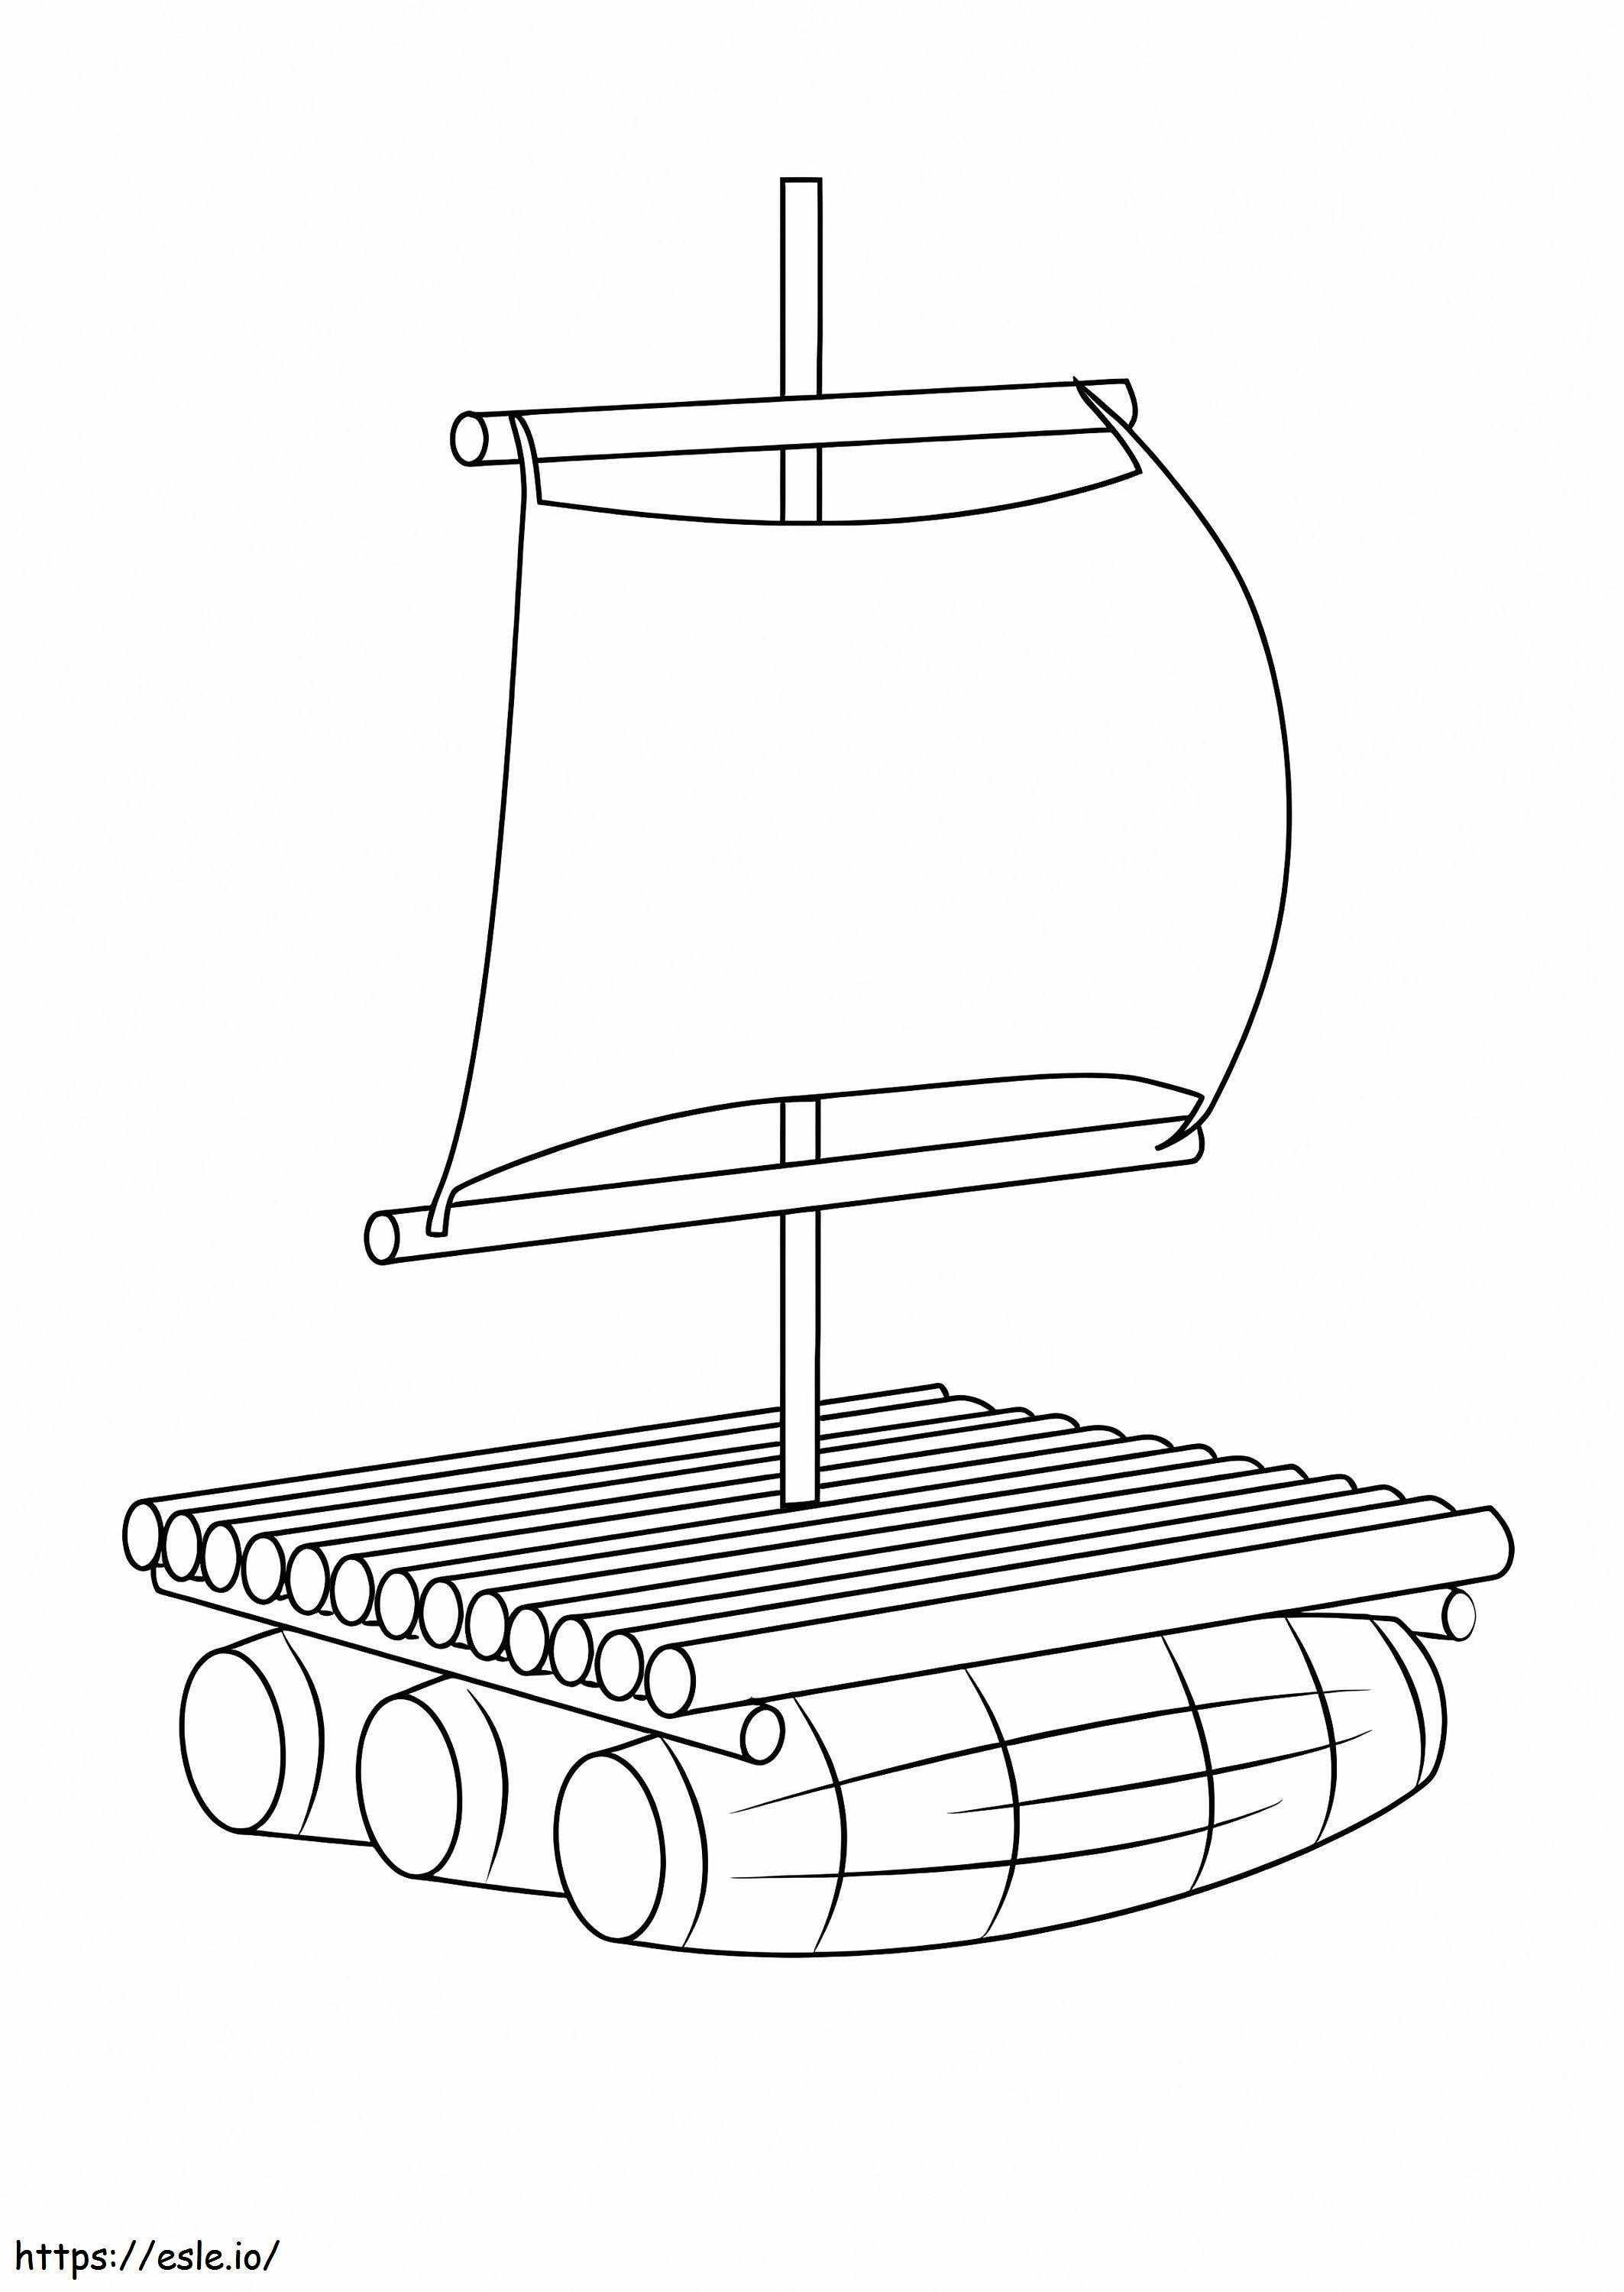 A Wooden Raft coloring page